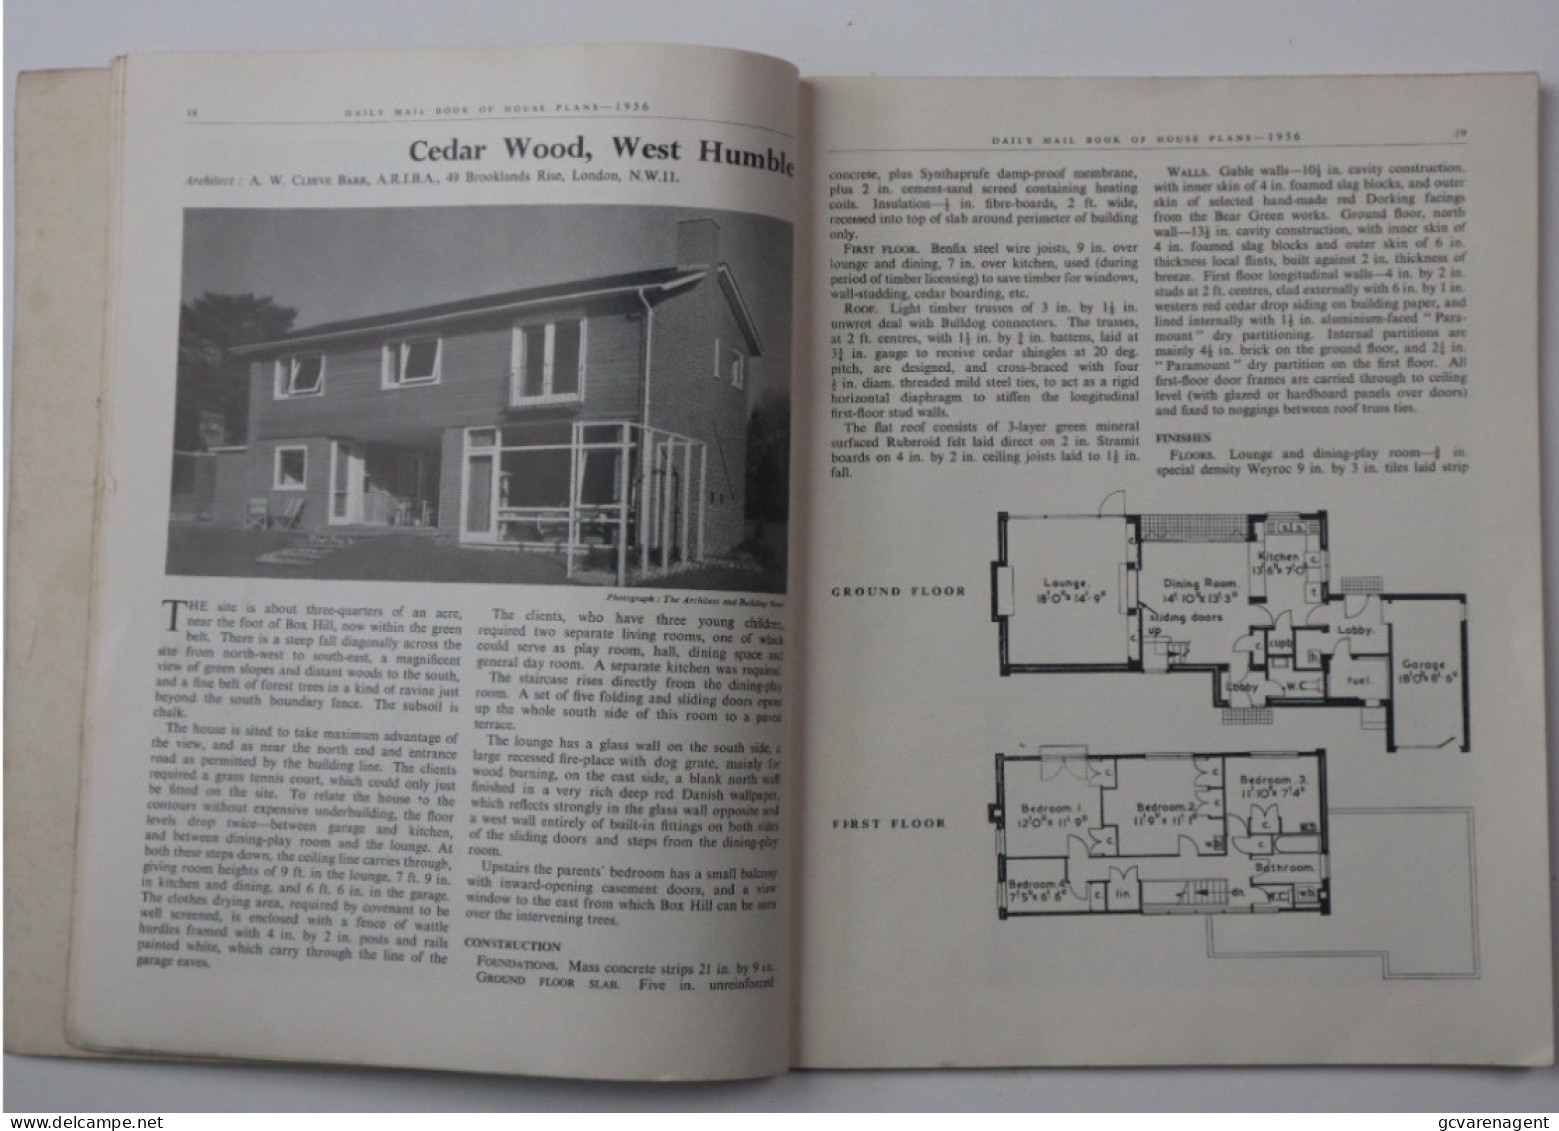 DAILY MAIL BOOK OF HOUSE PLANS 1956  96 PAGES   25.5 X 20.5 CM       LOOK SCANS - Architektur/Design